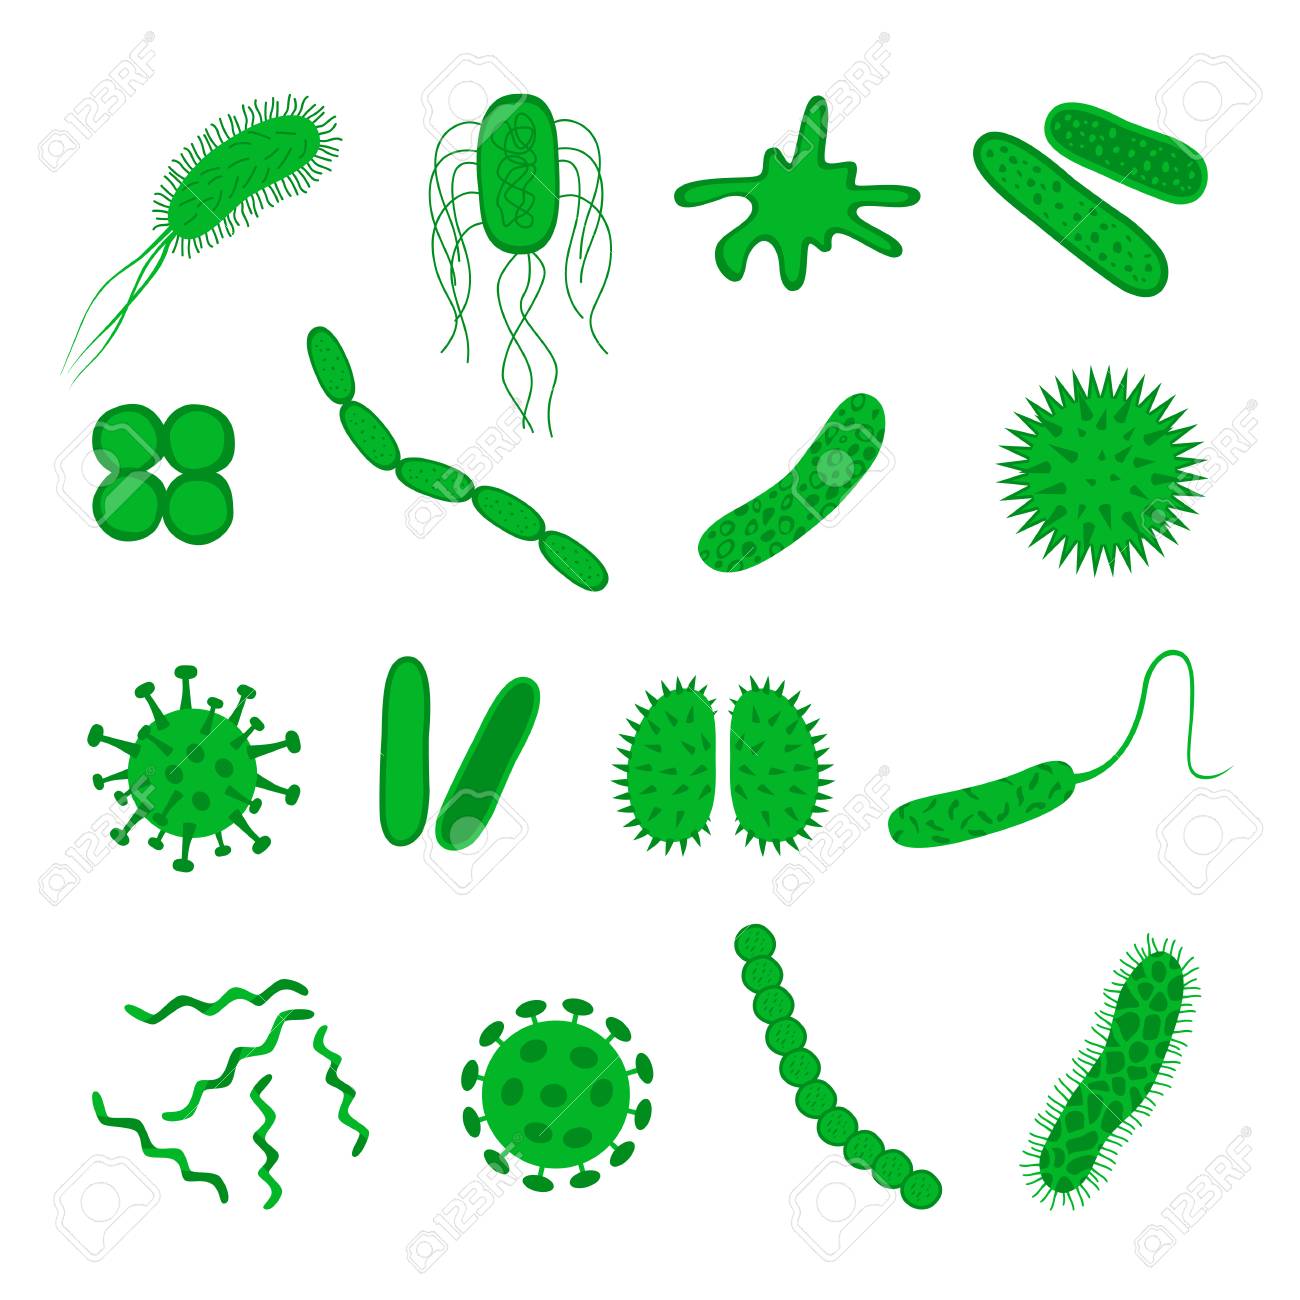 Germs And Bacteria Icons Set Isolated On White Background